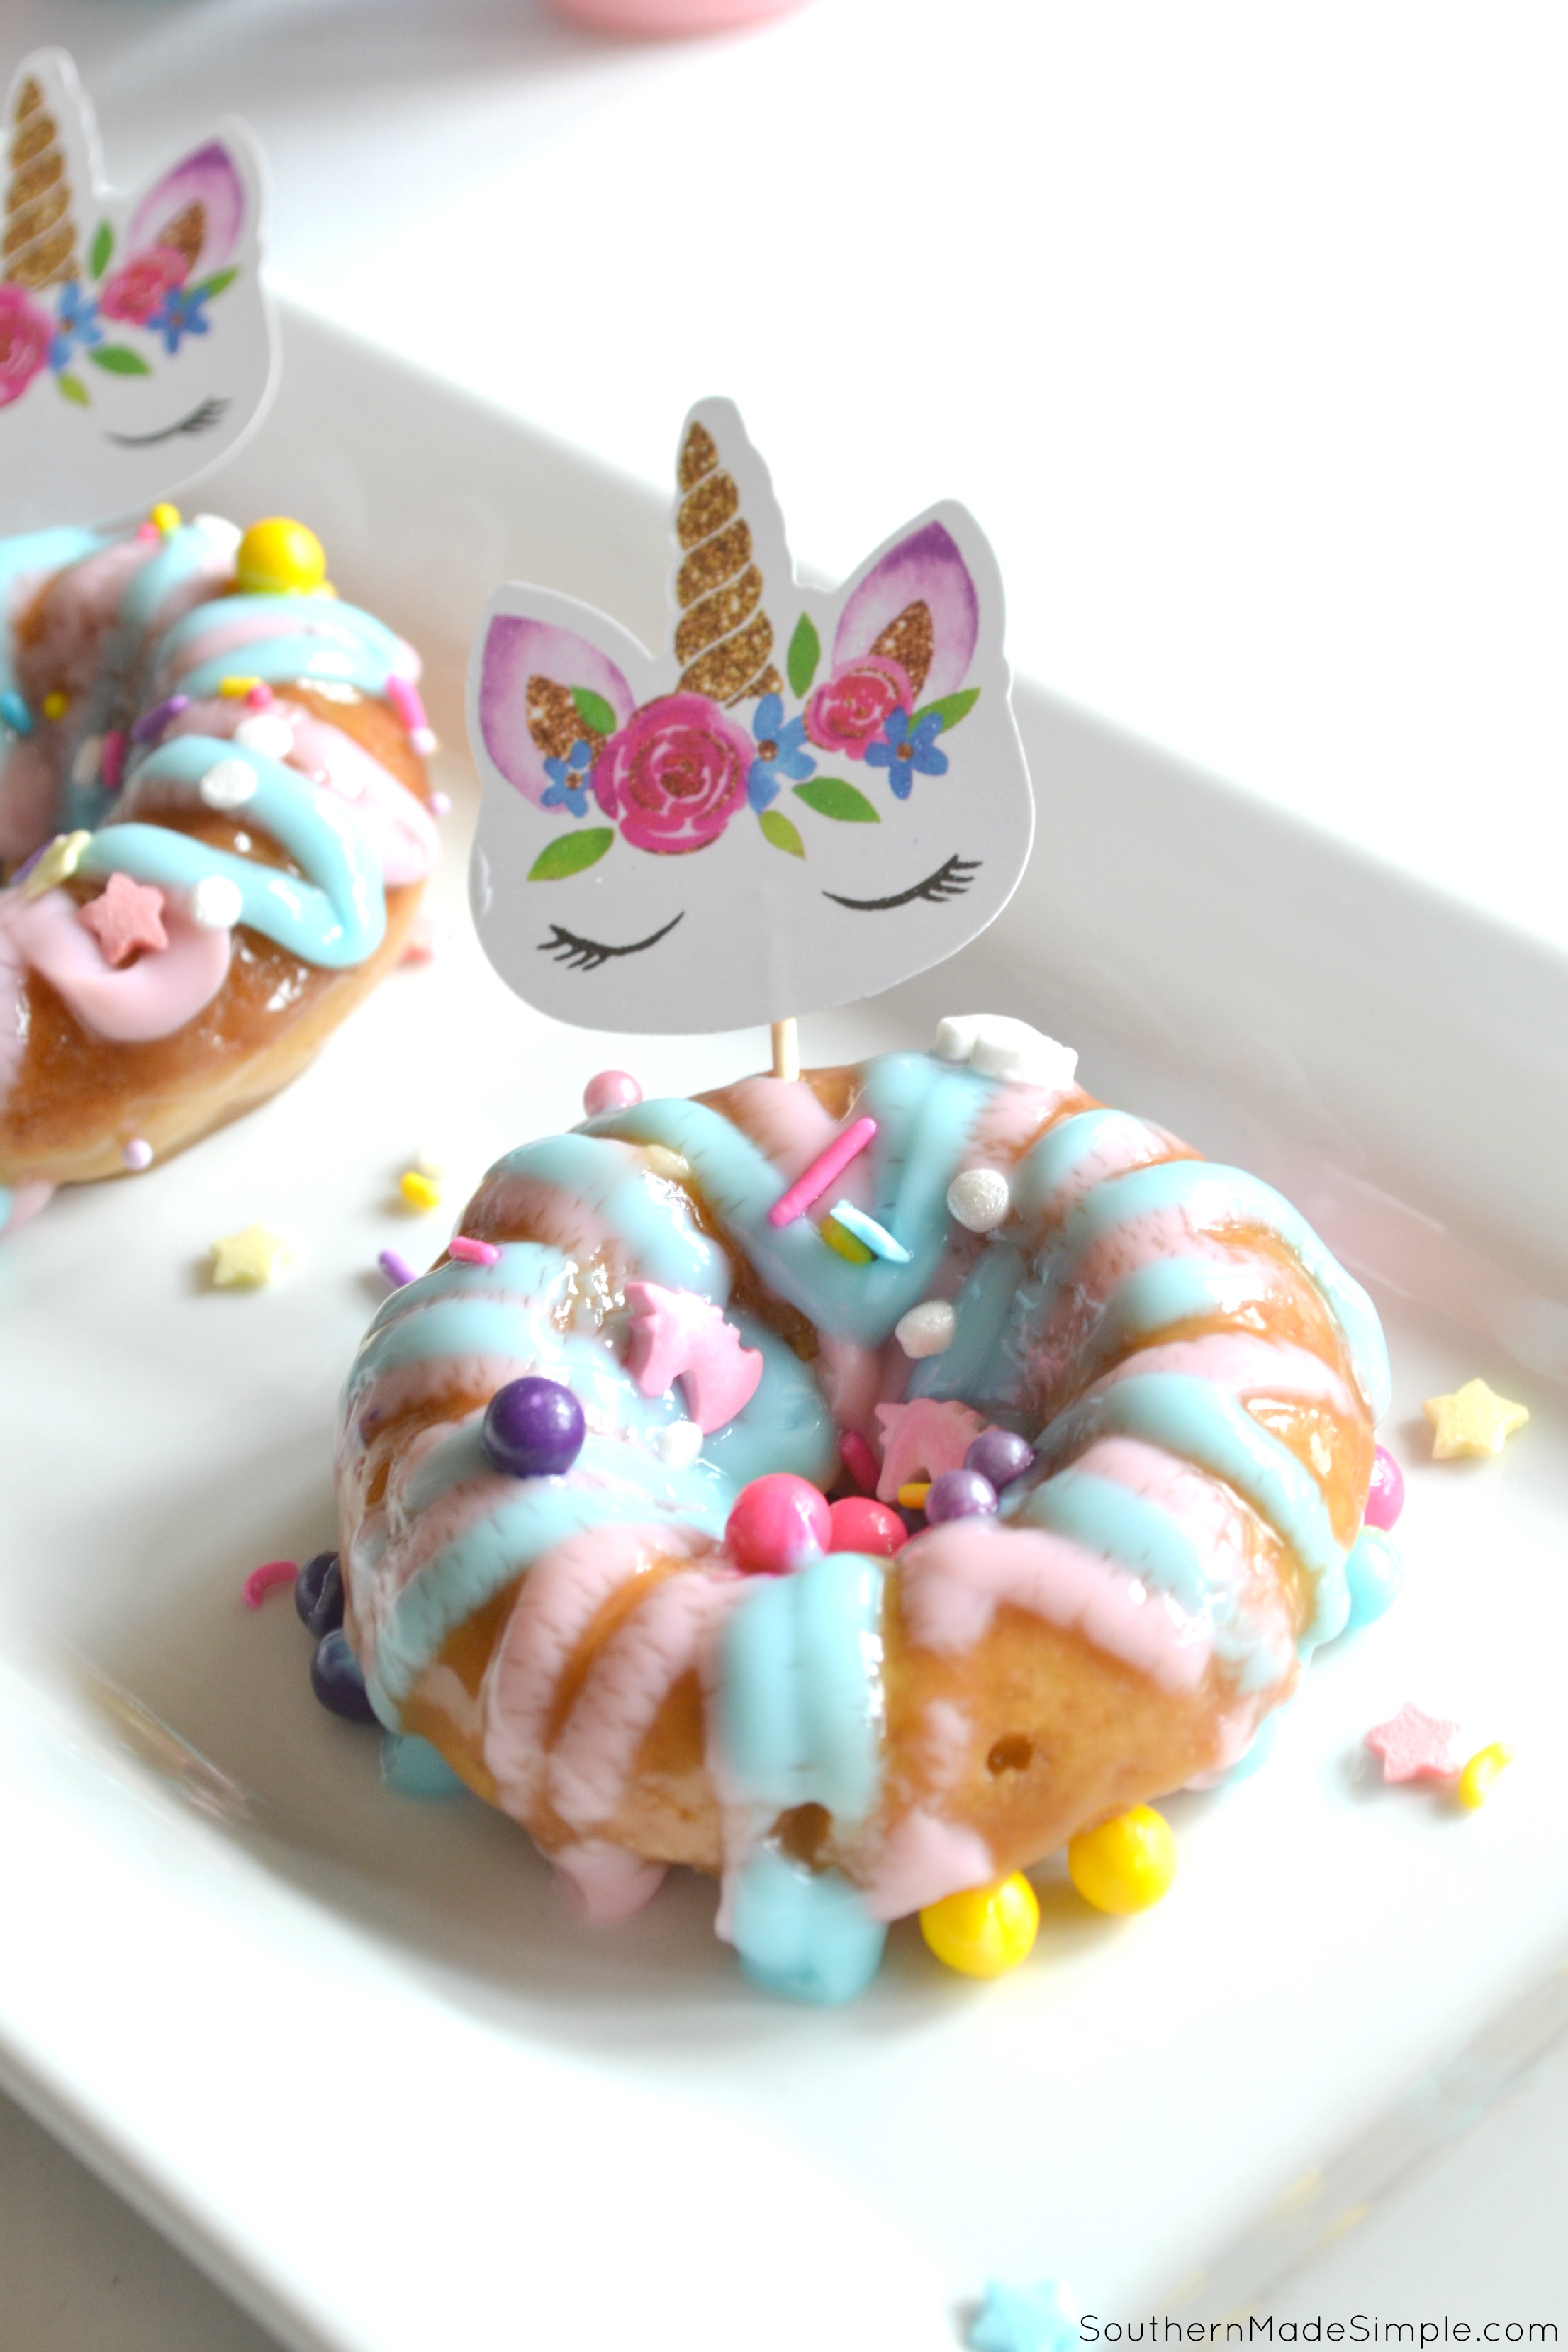 Enchanted Unicorn Doughnuts - a spectacularly sweet treat to pair with Unicorn Snack Packs to spark a little mystical and magical fun into anyone's day! #UnicornSnackPack #YasssUnicorn #UnicornMagic #ad